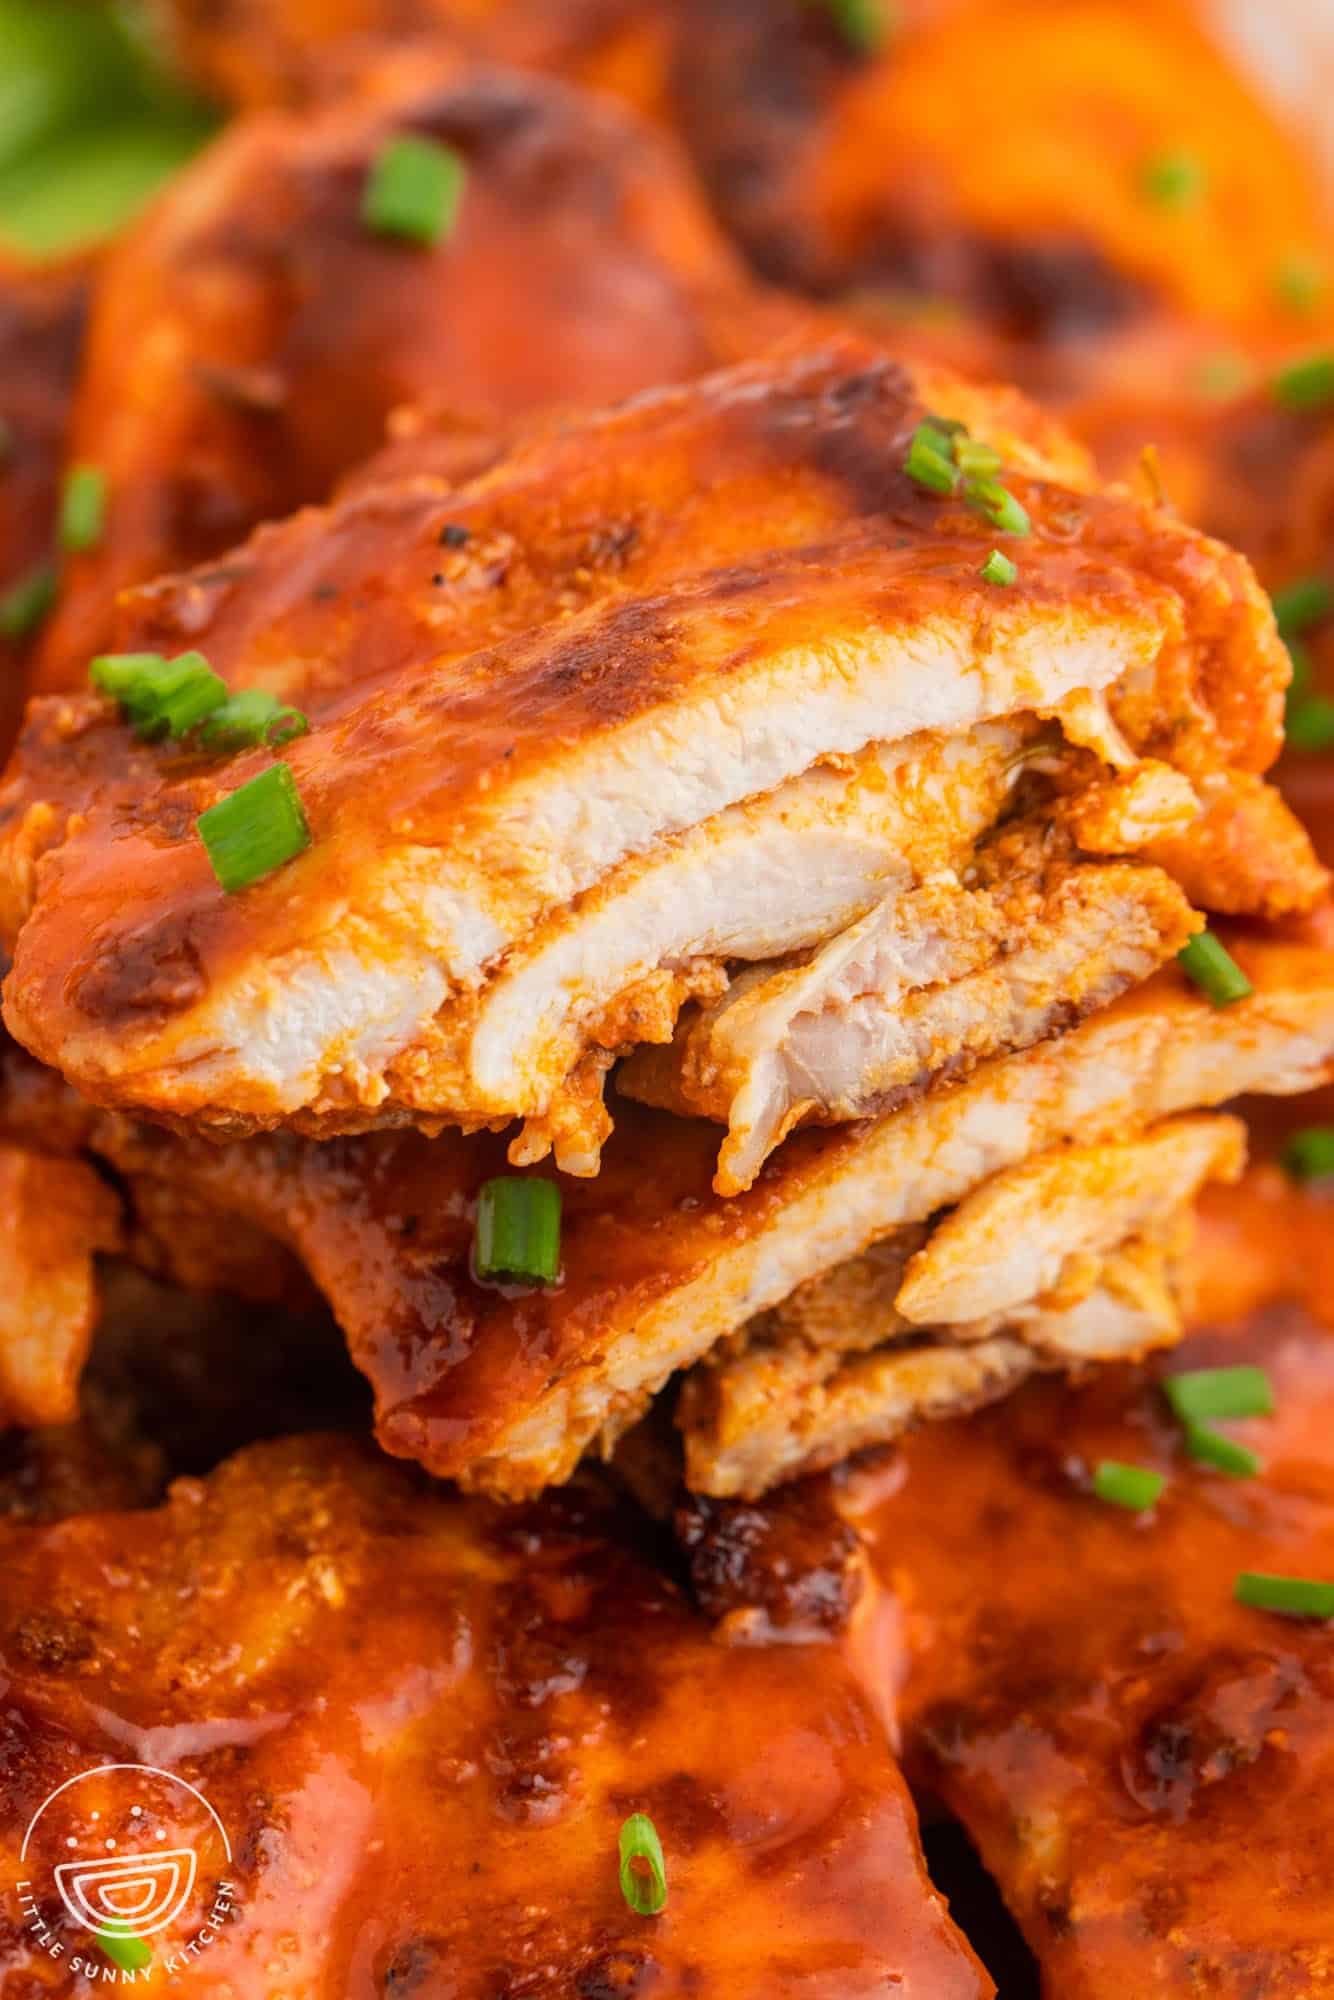 Buffalo chicken thighs, cut in half to show interior texture.